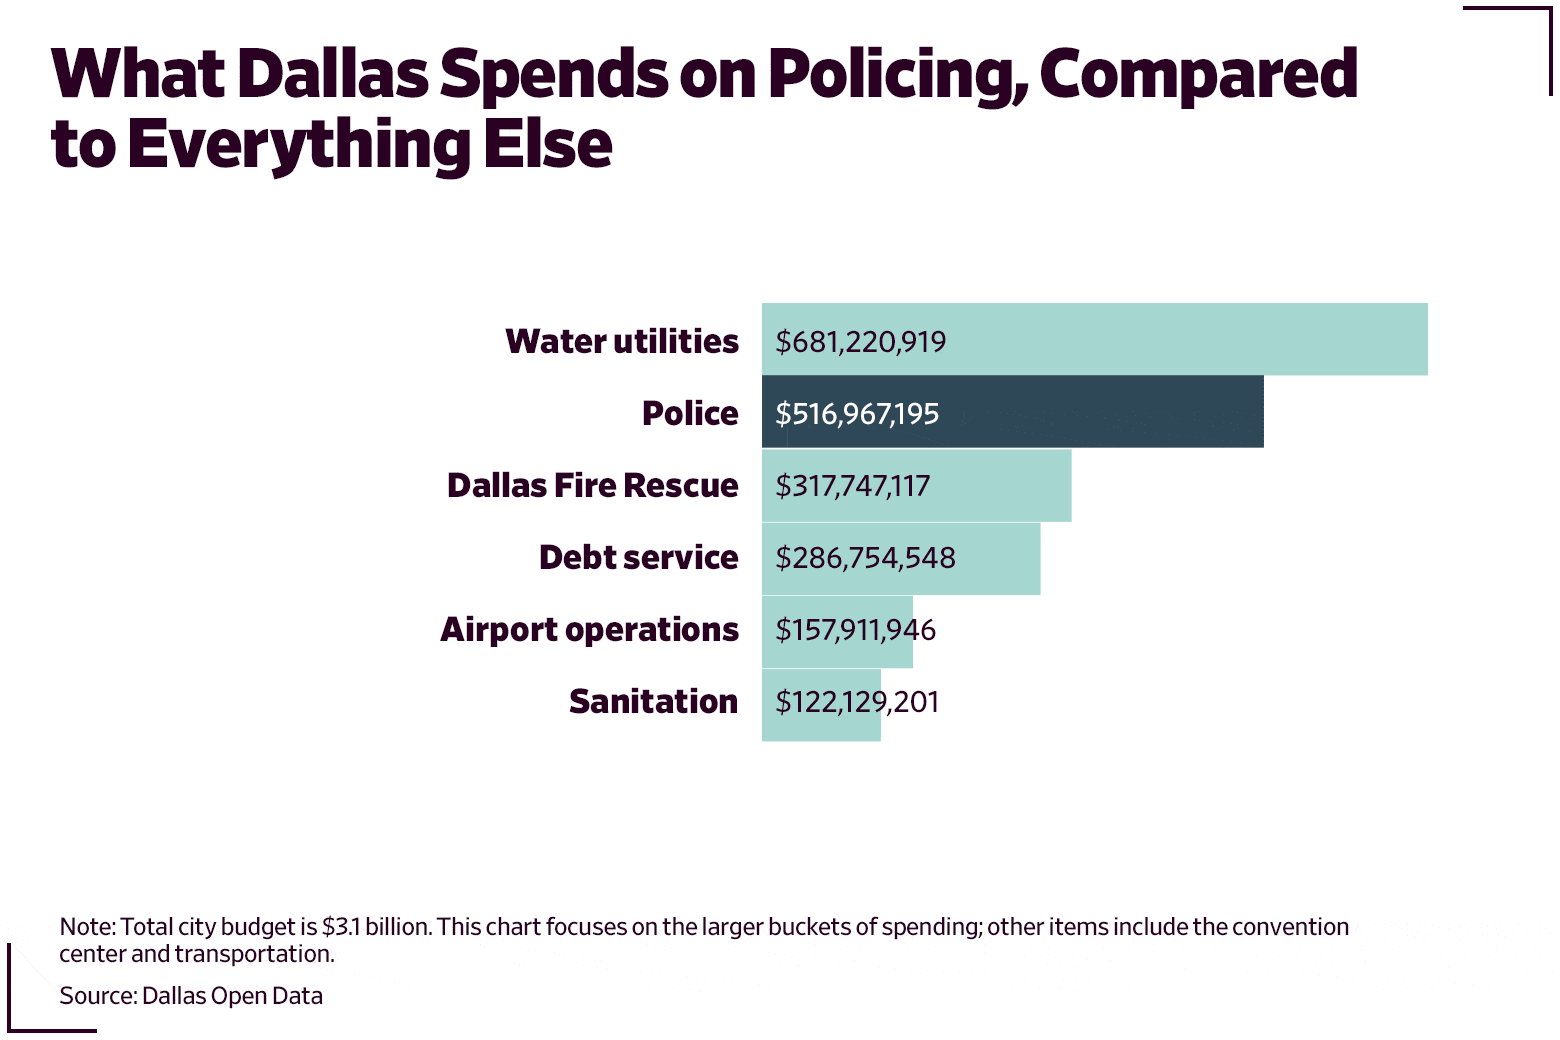 What Dallas spends on policing, compared to everything else.